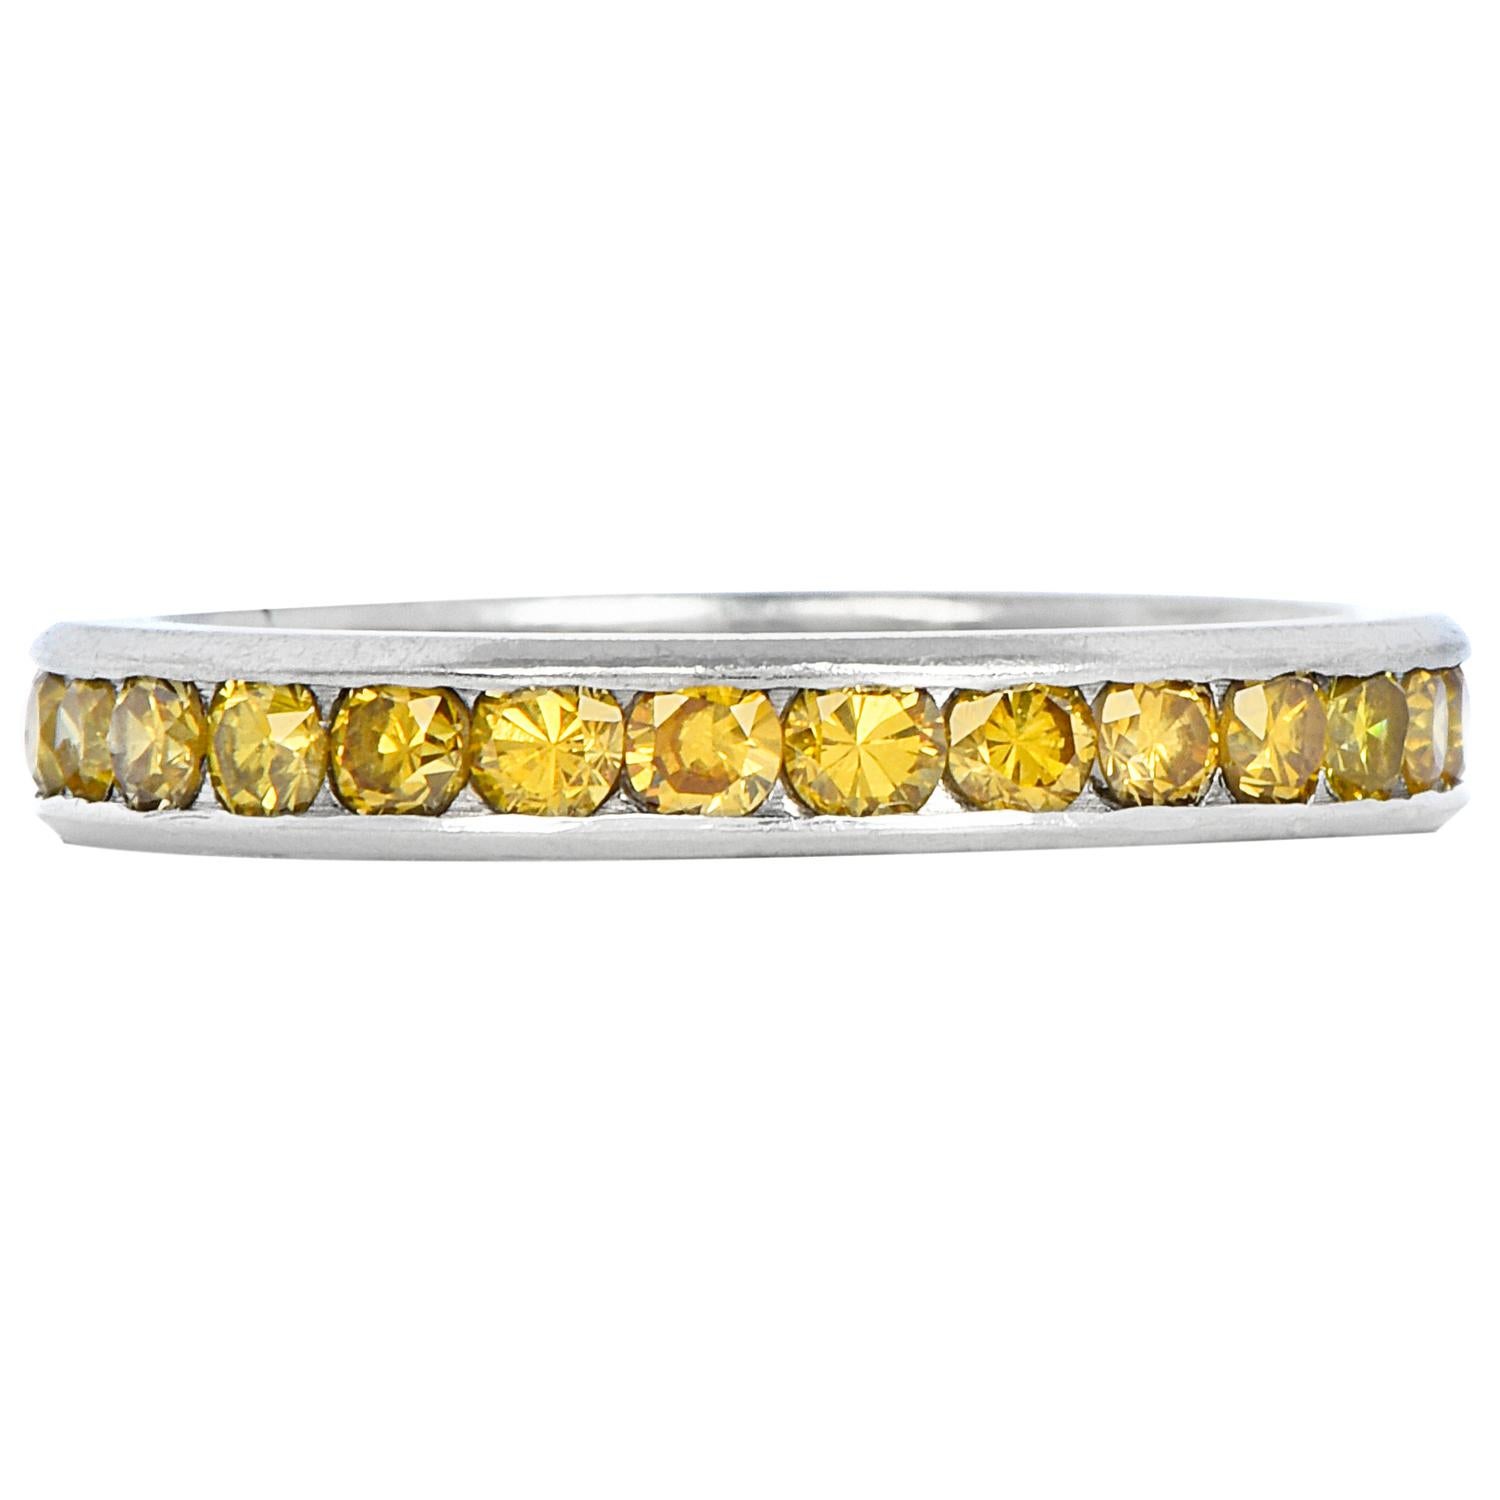 Vintage Oscar Heyman Eternity natural Vivid diamond Diamond band ring with a sparkly glistening look.

This classic band is crafted in solid Platinum, weighing approximately 3.5 grams.

It features approx 30 Genuine dazzlings of natural vivid yellow